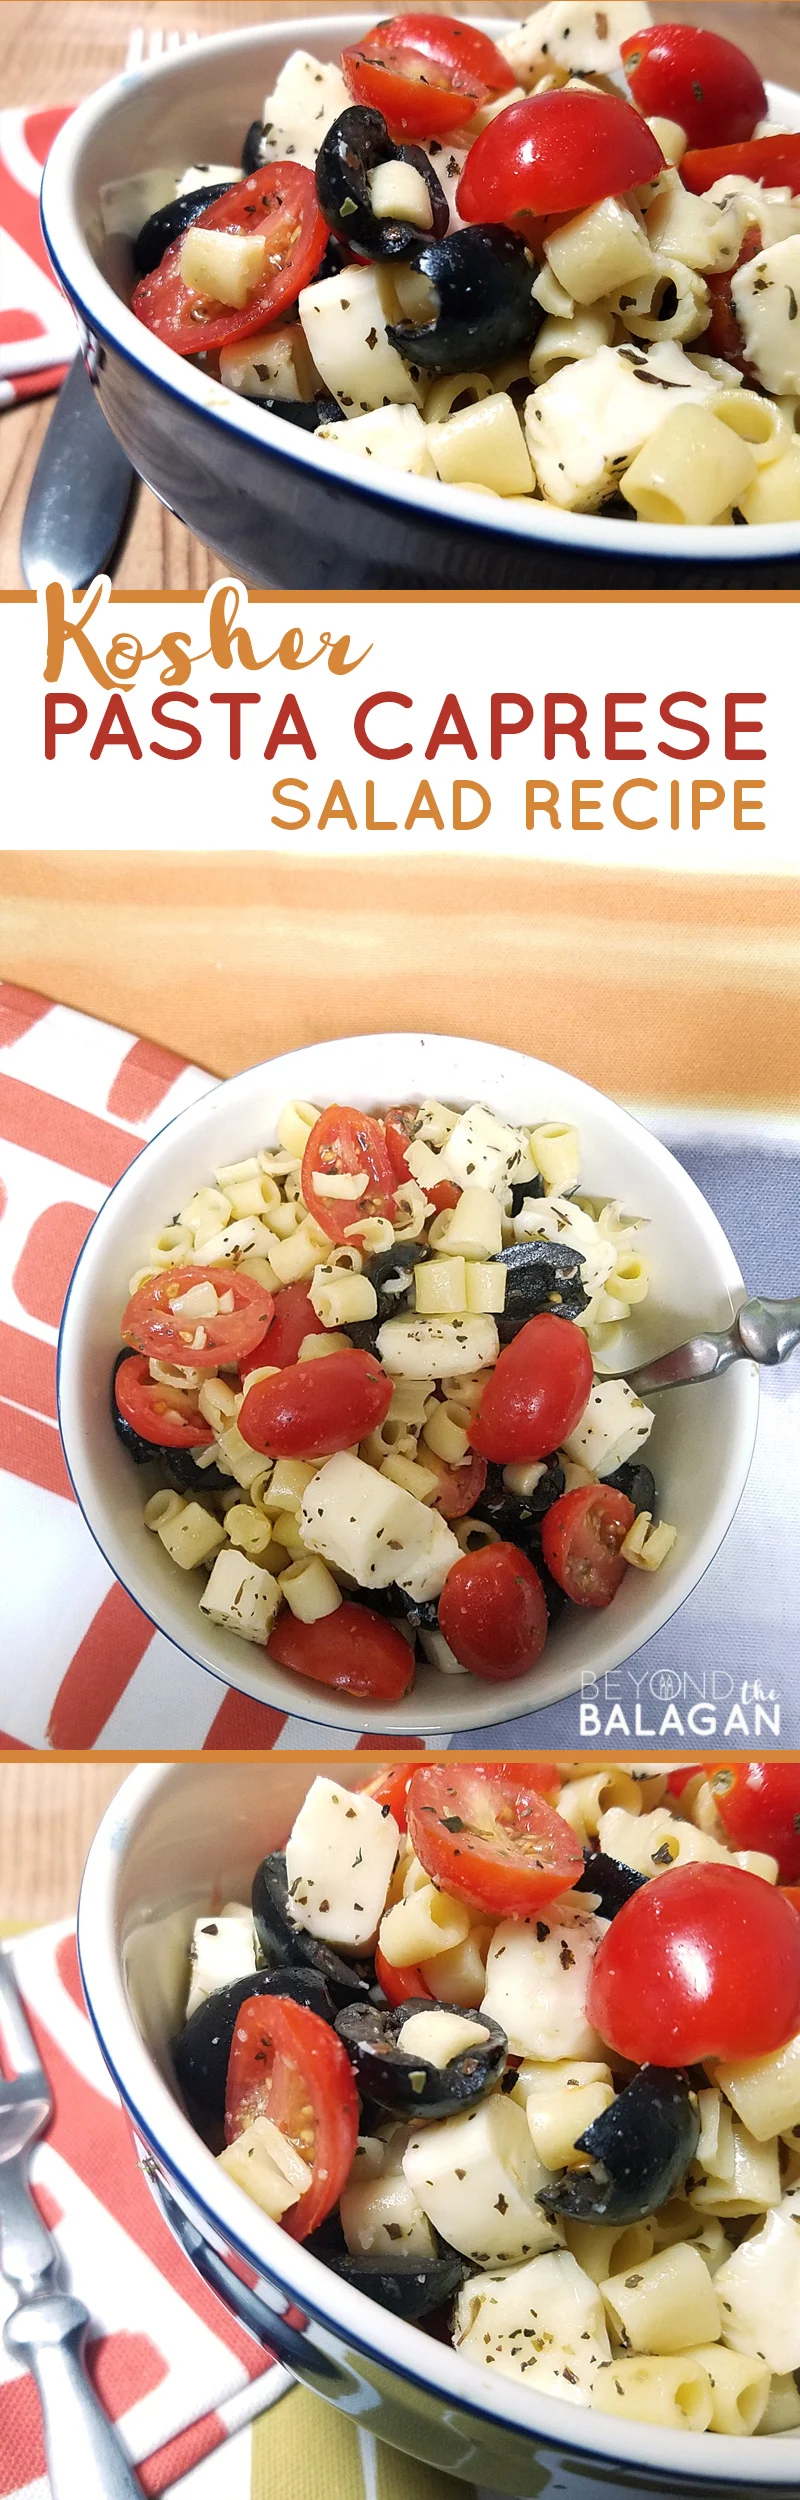 Make this delicious pasta caprese salad - a yummy pasta salad recipe that's Kosher, dairy and easy to make! It's kid-friendly and allergy safe too! #recipes #allergyfriendly #pasta #pastasalad #kidfriendly #allergysafe #kosher #kosherfood #kosherrecipe